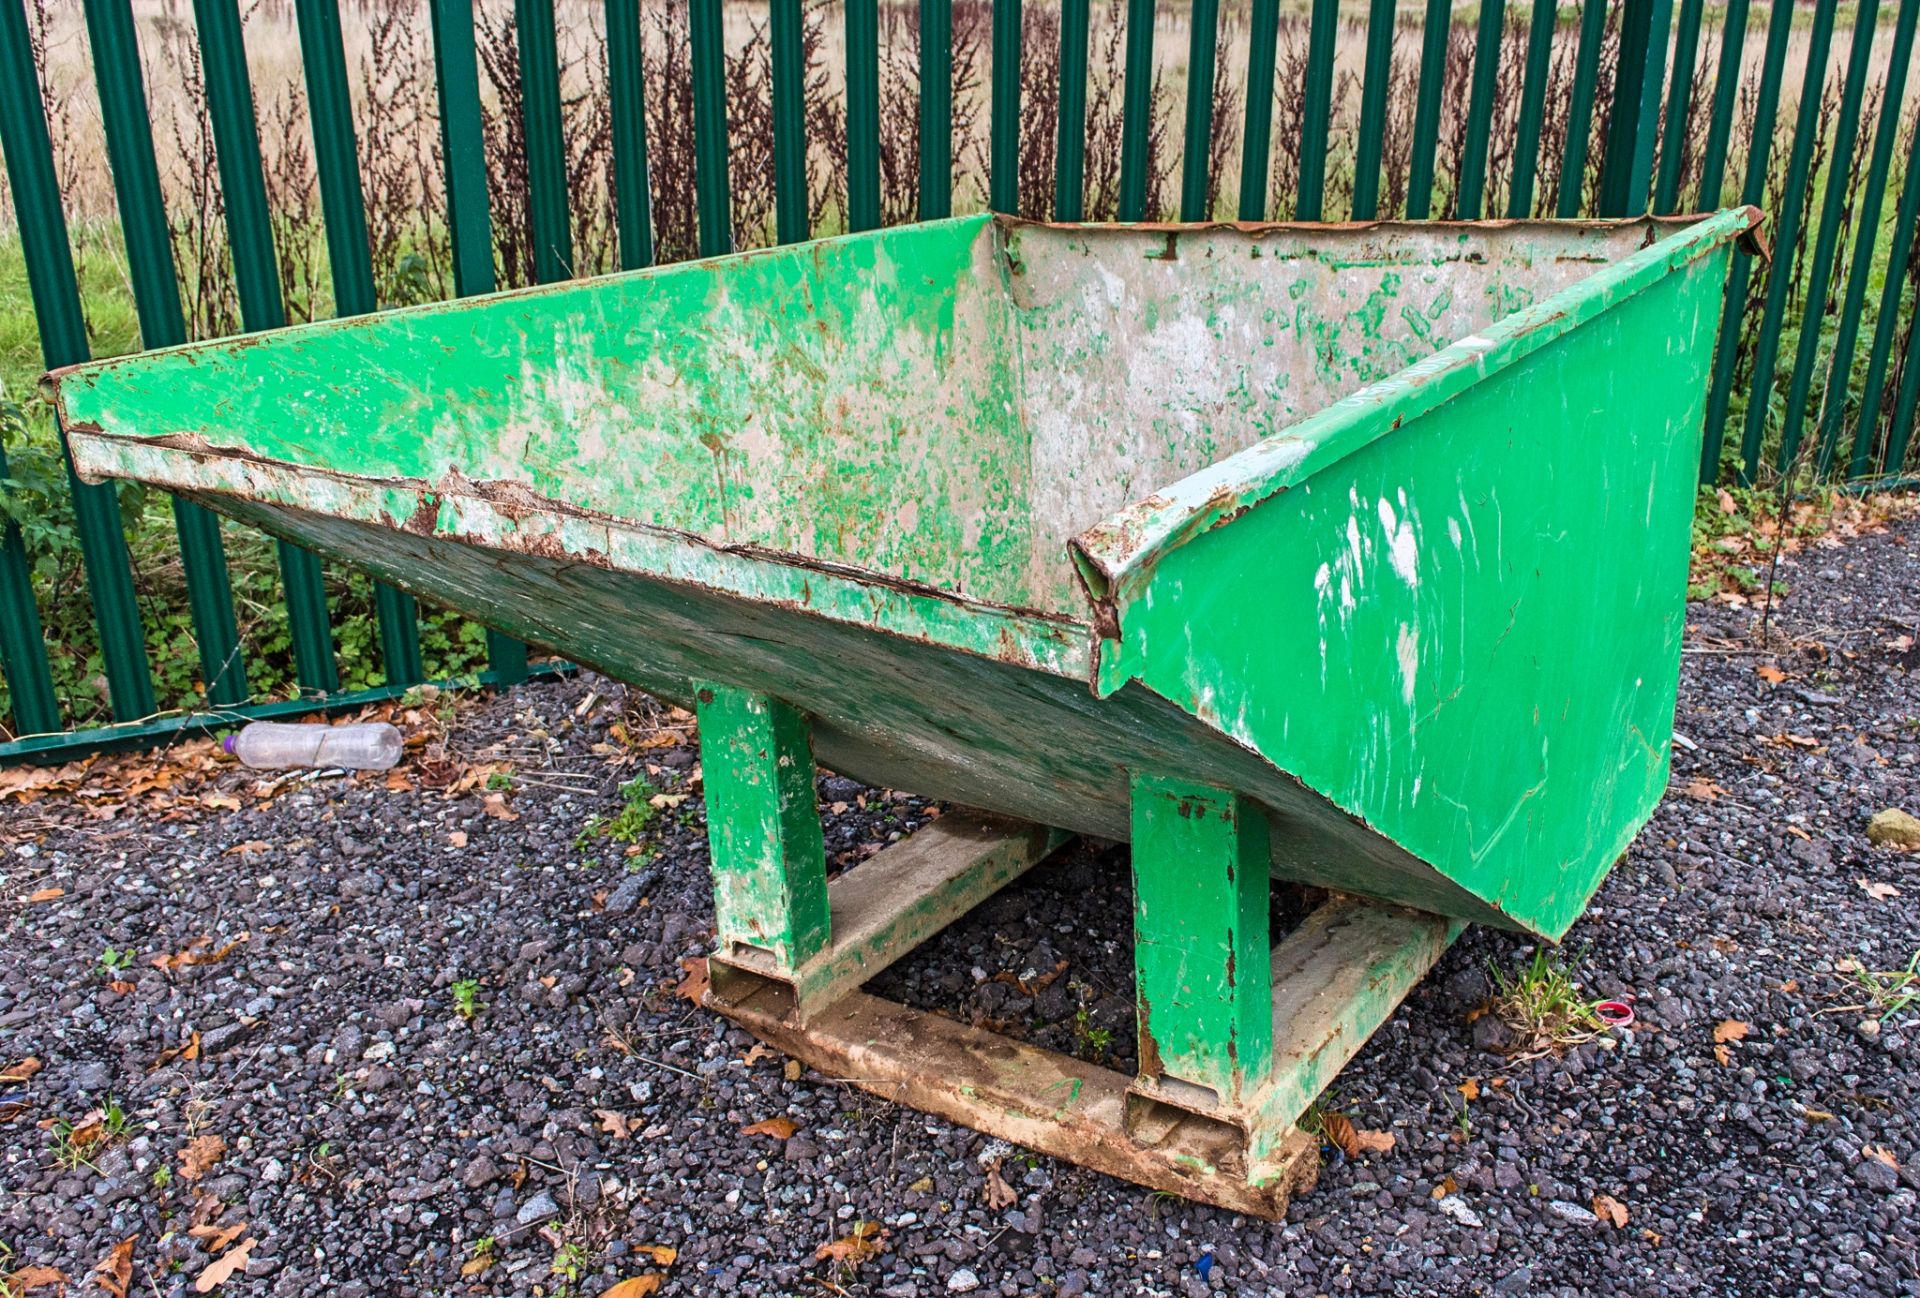 Invicta auto lock tipping skip ** No VAT on hammer but VAT will be charged on buyer's premium **